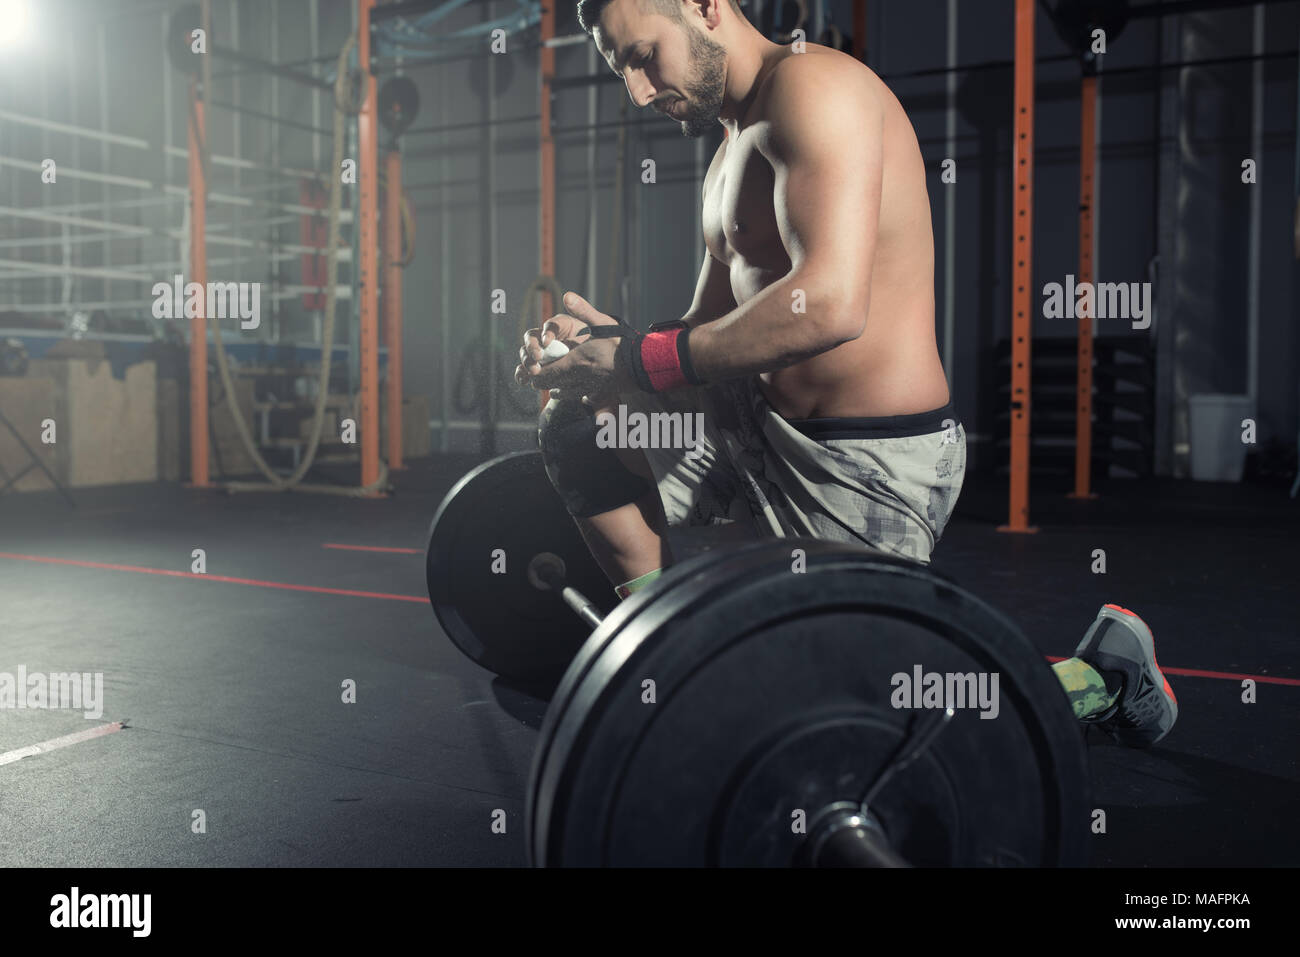 Athletic man works out at the gym with a barbell Stock Photo